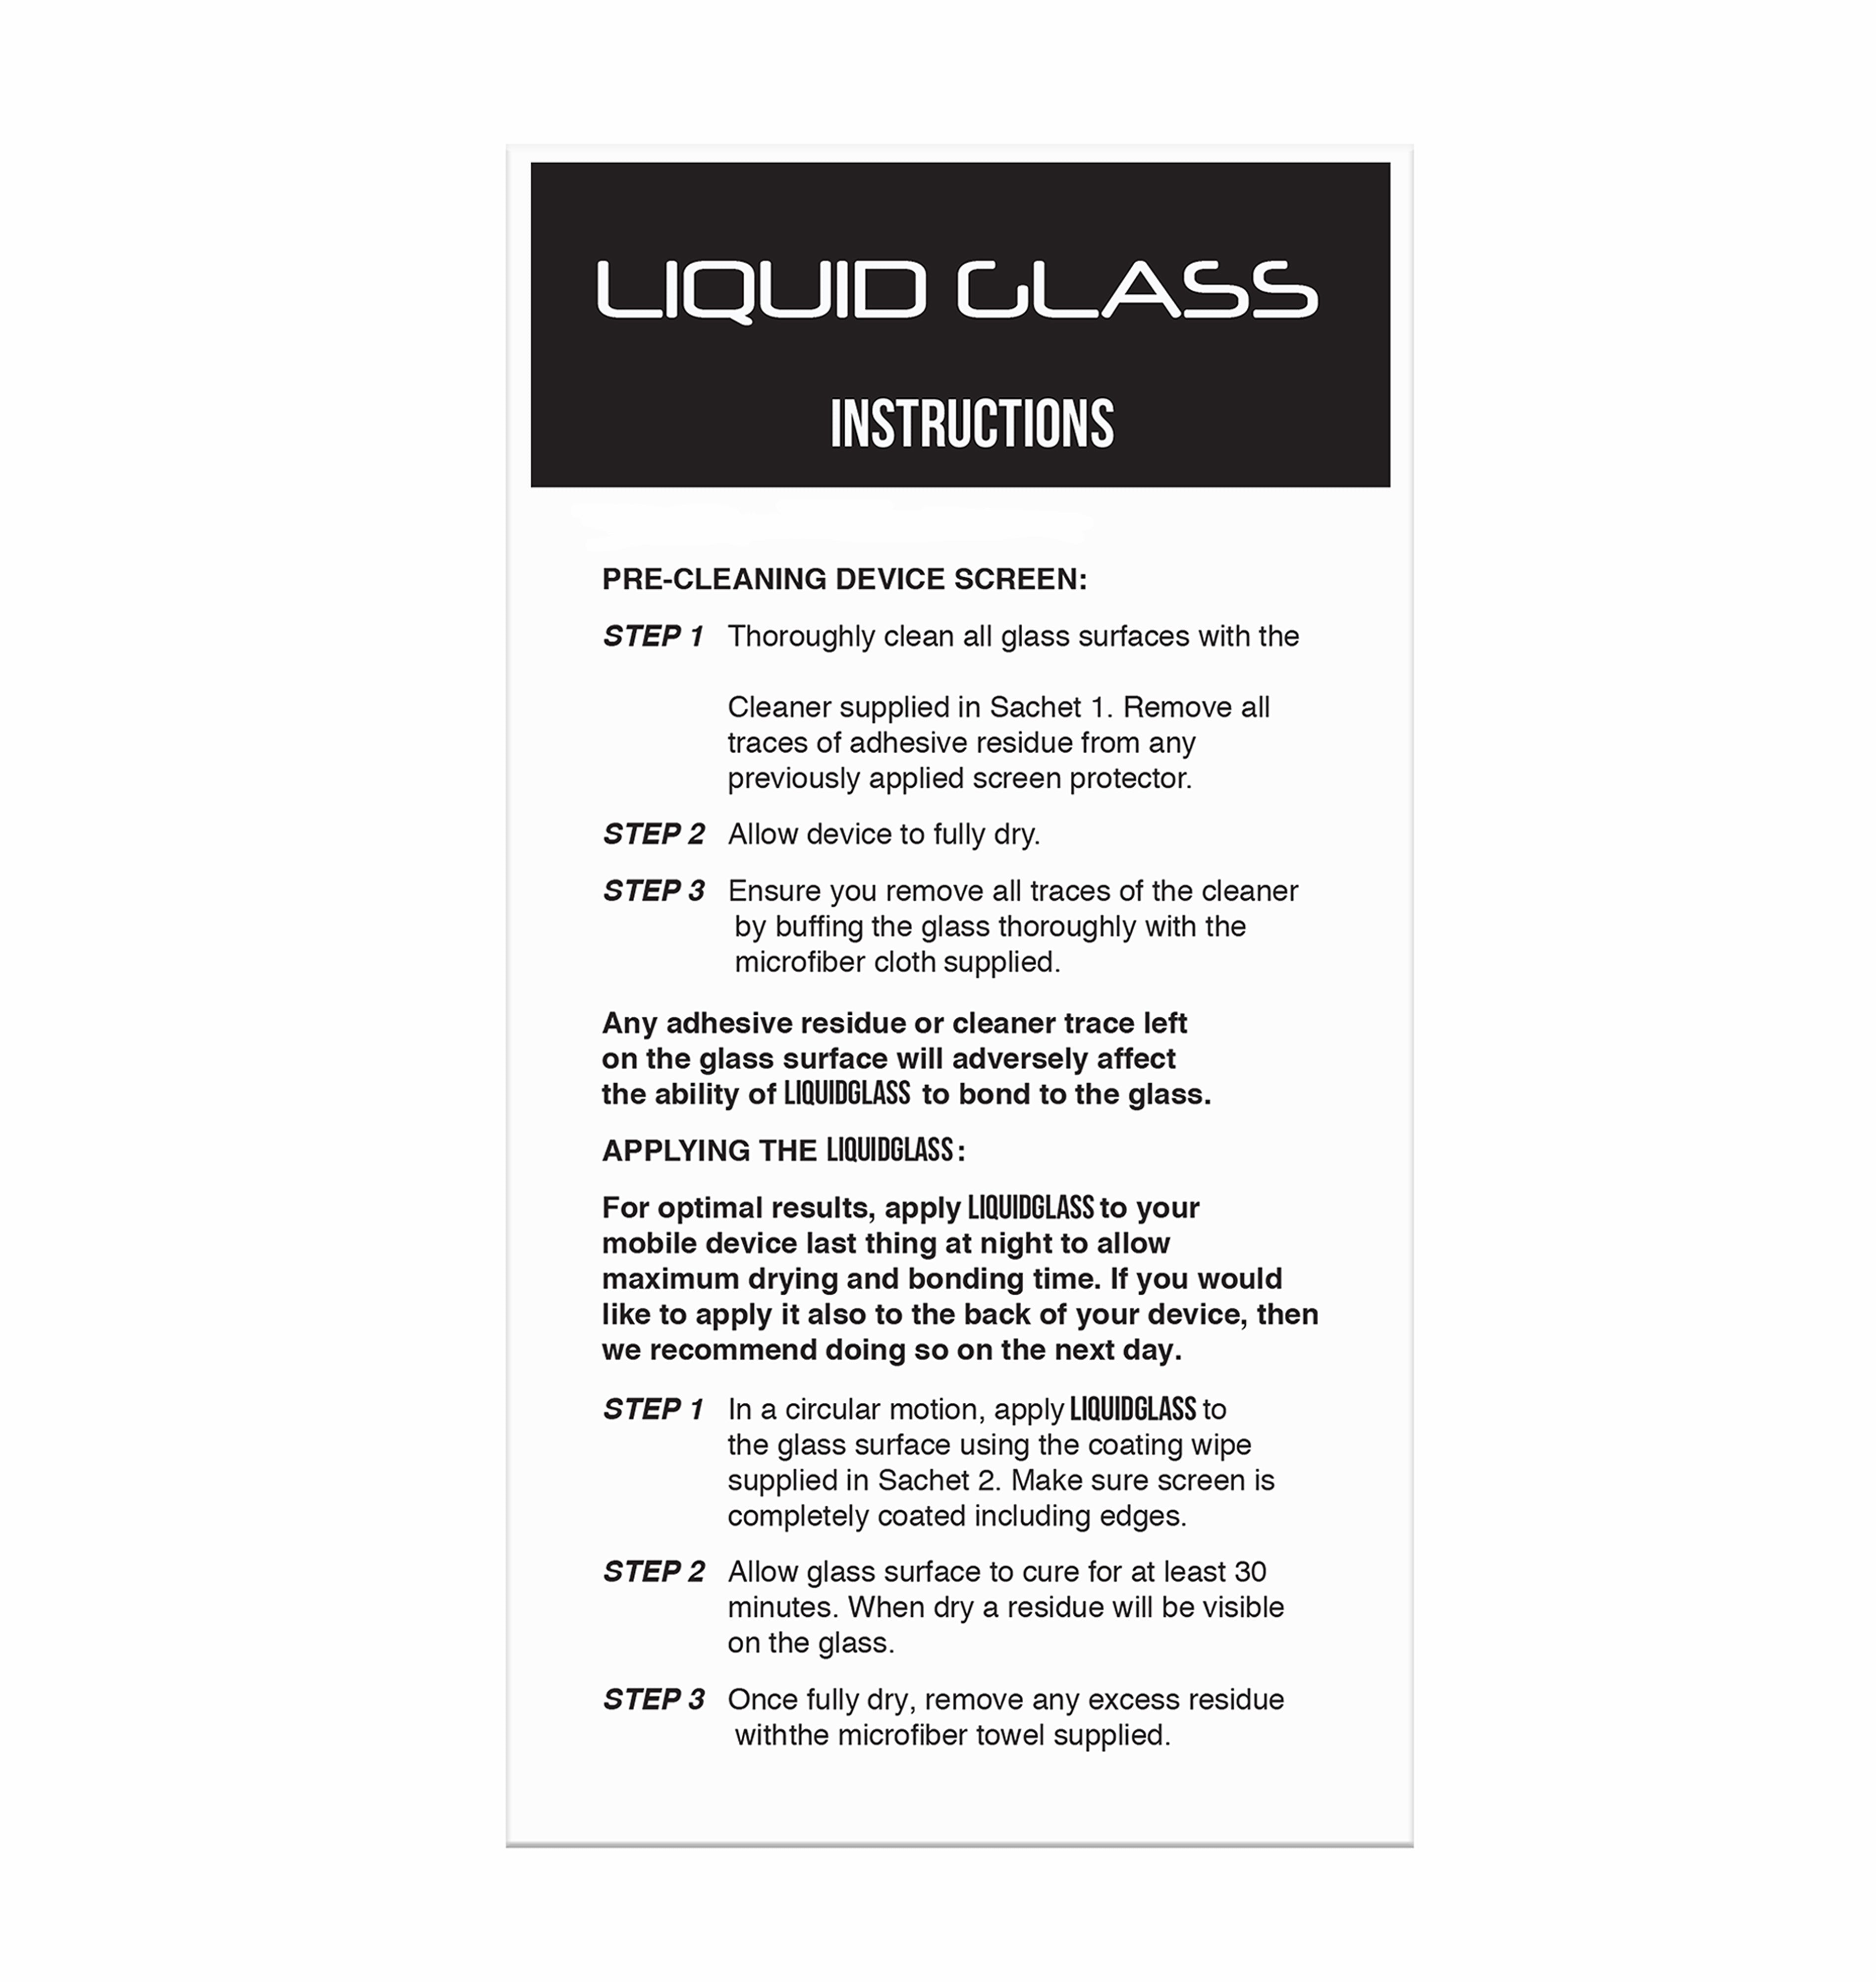 Luvvitt $250 Screen Protection Guarantee Liquid Glass + Tempered Glass Protector Bundle for iPhone 11 2019